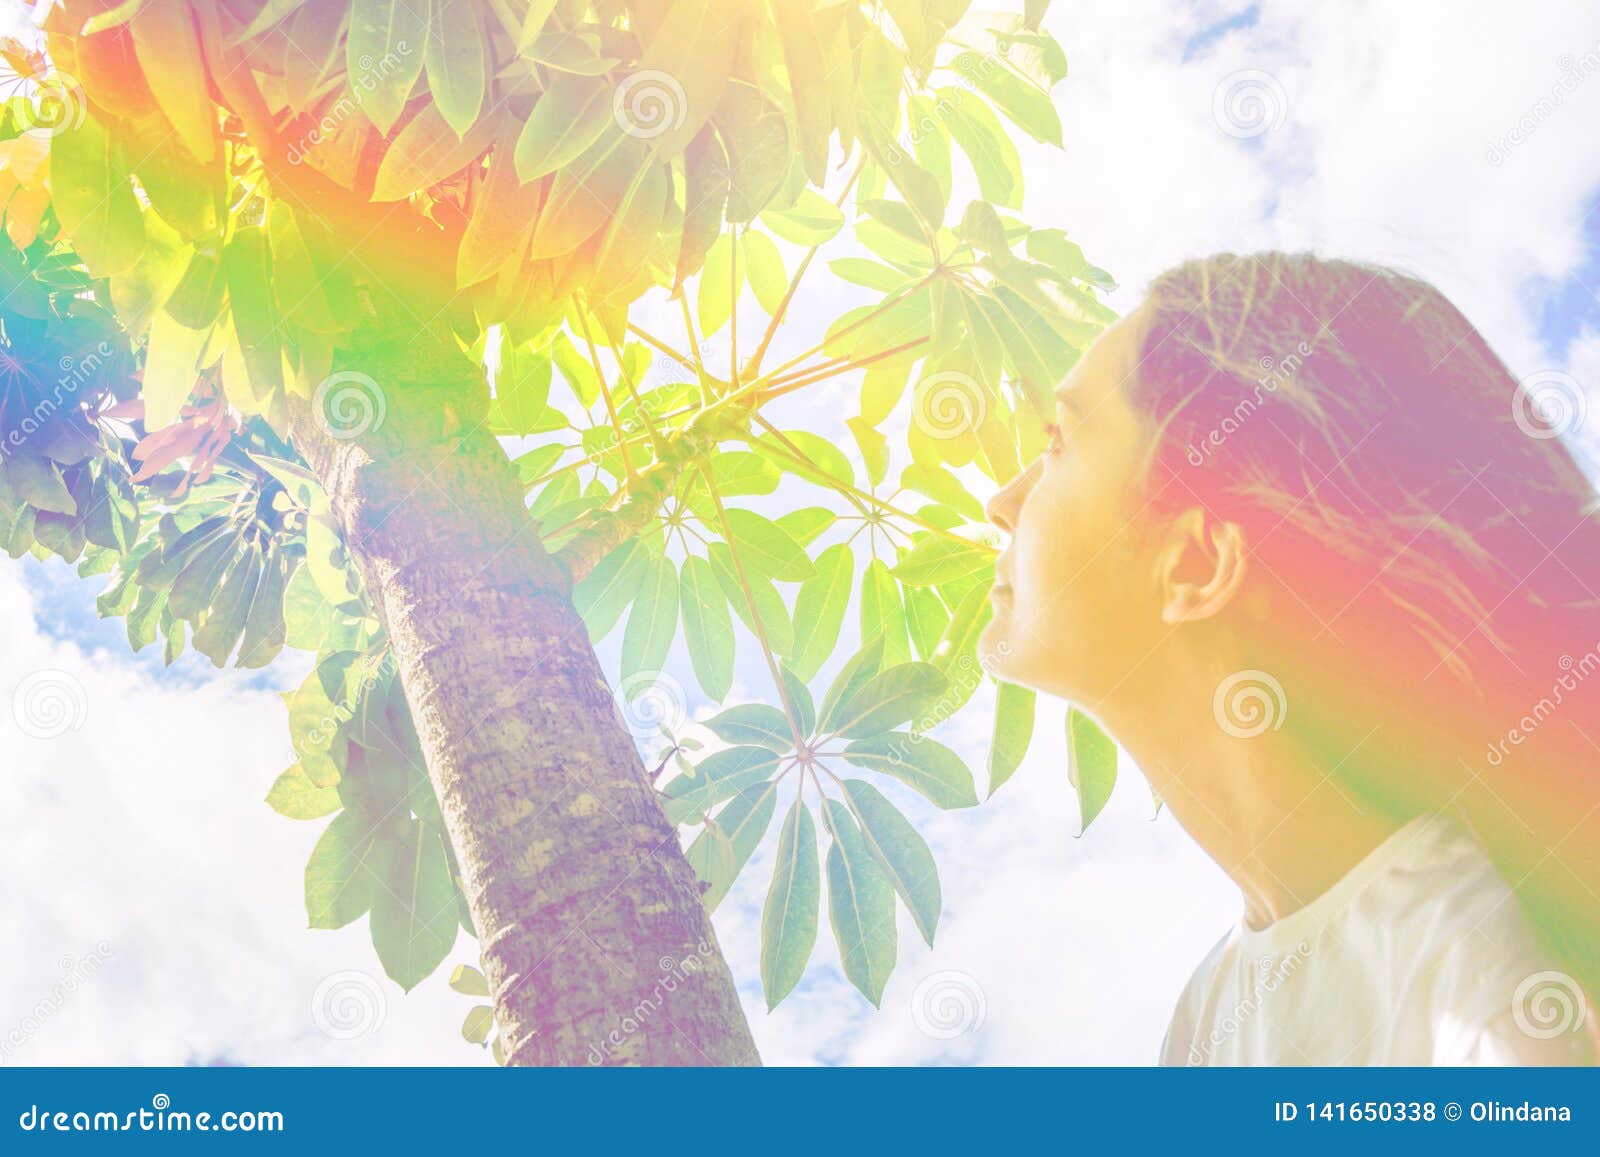 young caucasian woman girl with long hair standing under tree looking up in the sky green foliage. contemplation tranquility